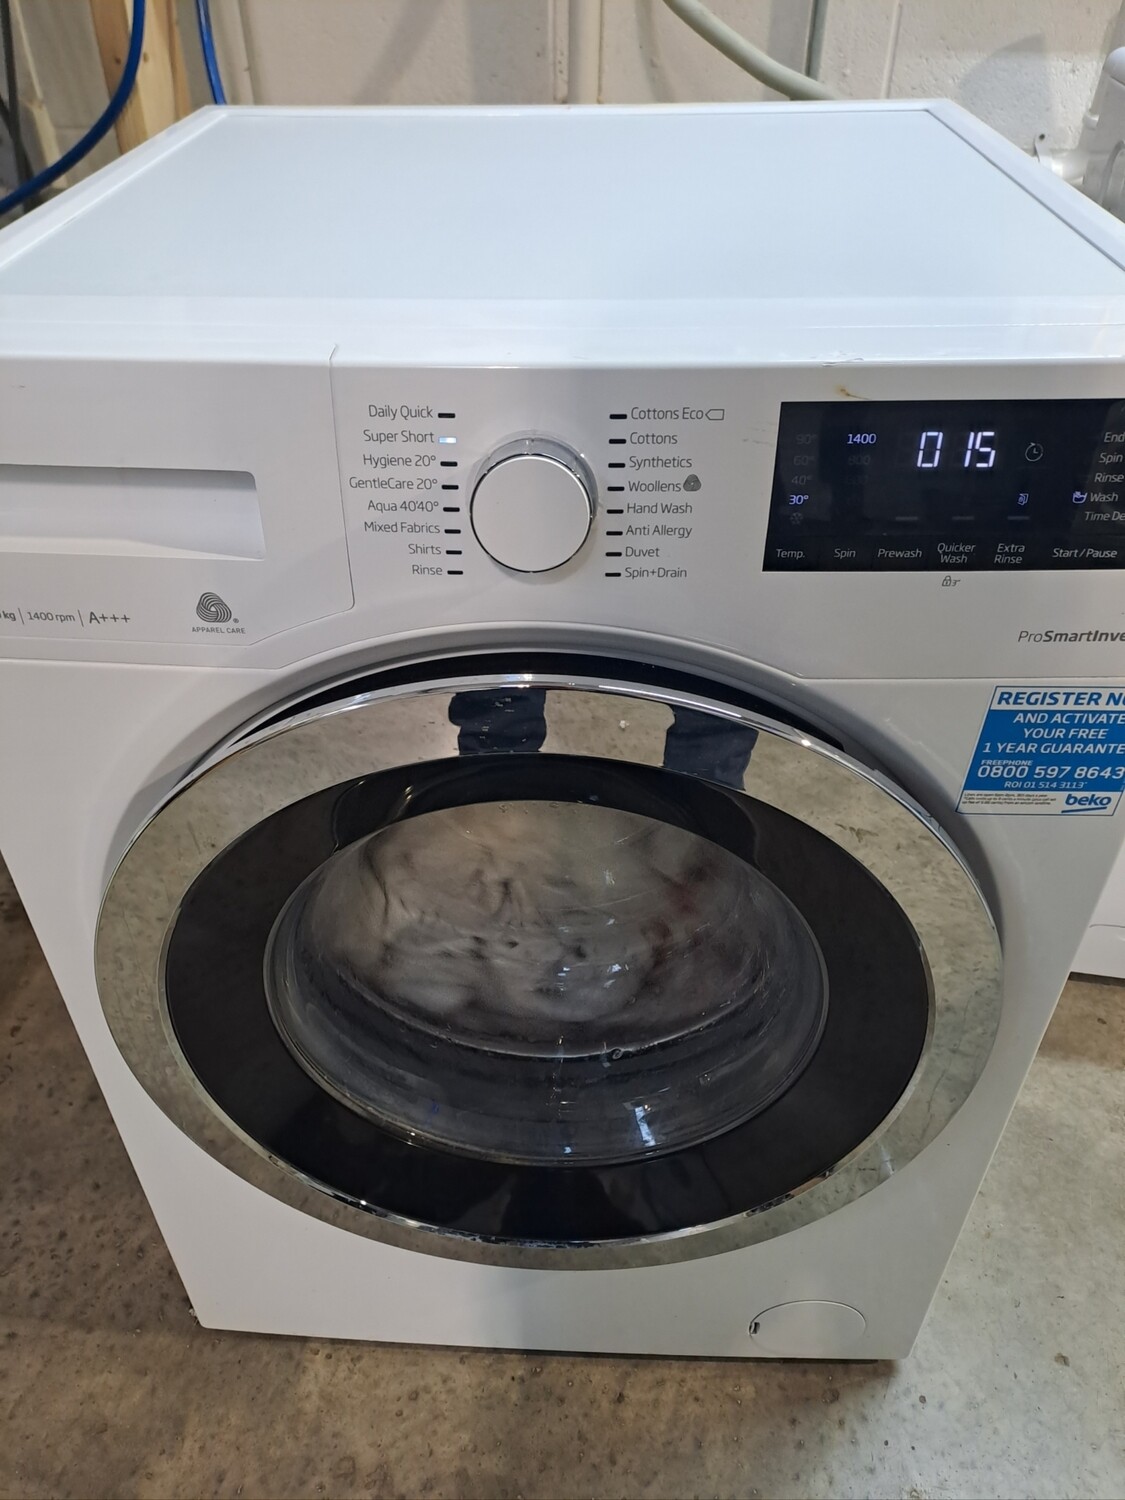 Beko WY104344W 10kg Load 1400 Spin Washing Machine - White - H85 W60 D64 Refurbished - 6 Month Guarantee. This item is located at our Whitby Road Shop